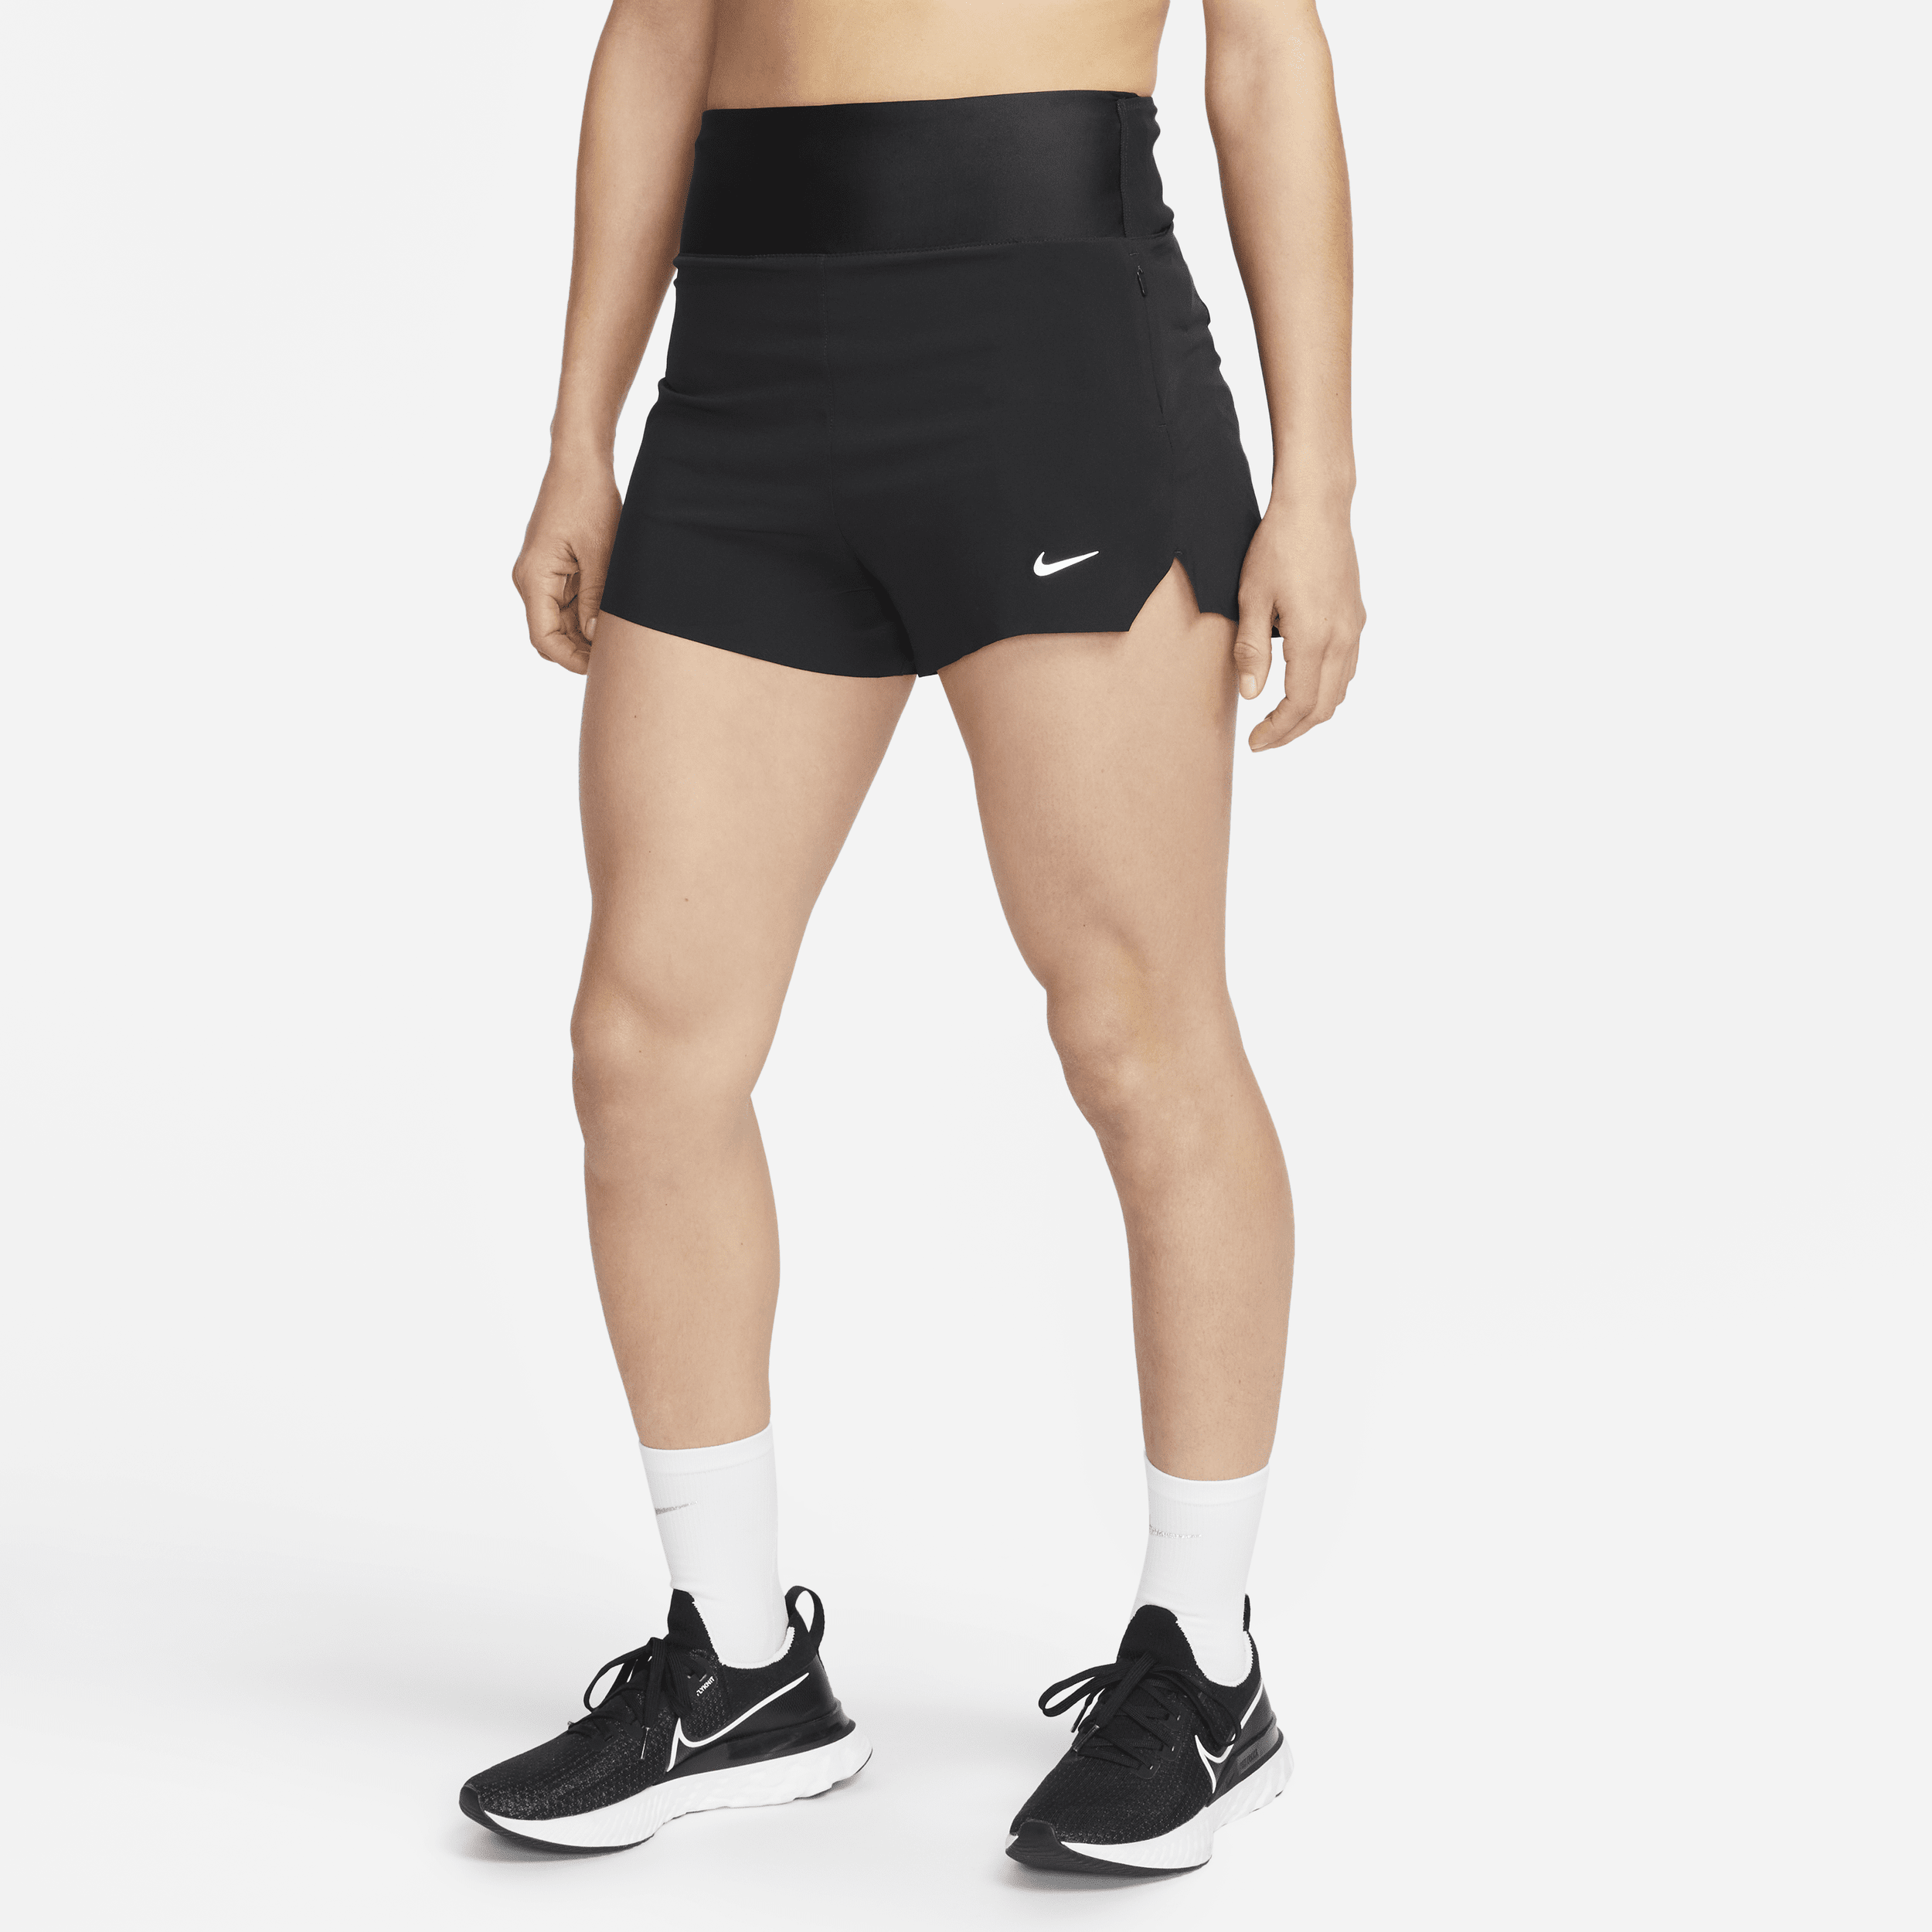 NIKE WOMEN'S DRI-FIT SWIFT HIGH-WAISTED 3" BRIEF-LINED RUNNING SHORTS,1009972428